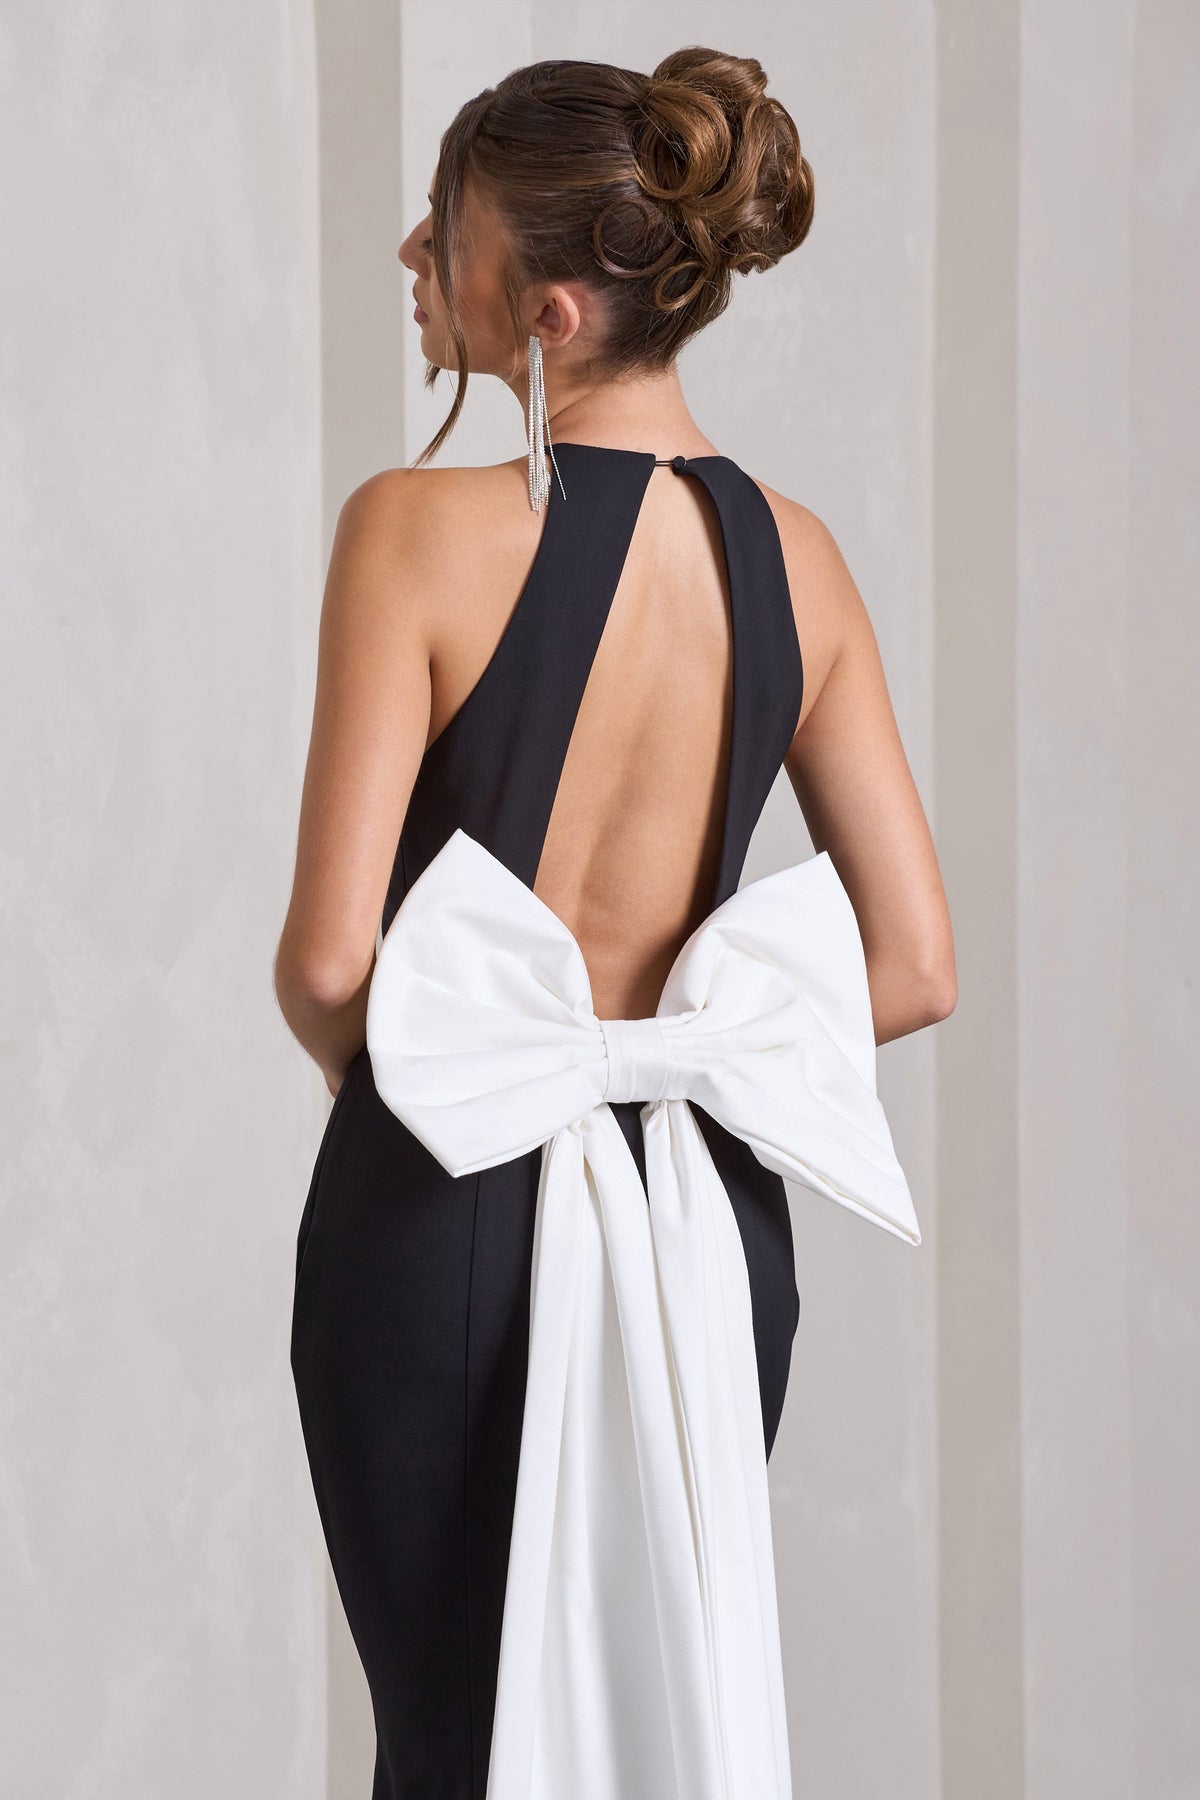 black dress with white bow